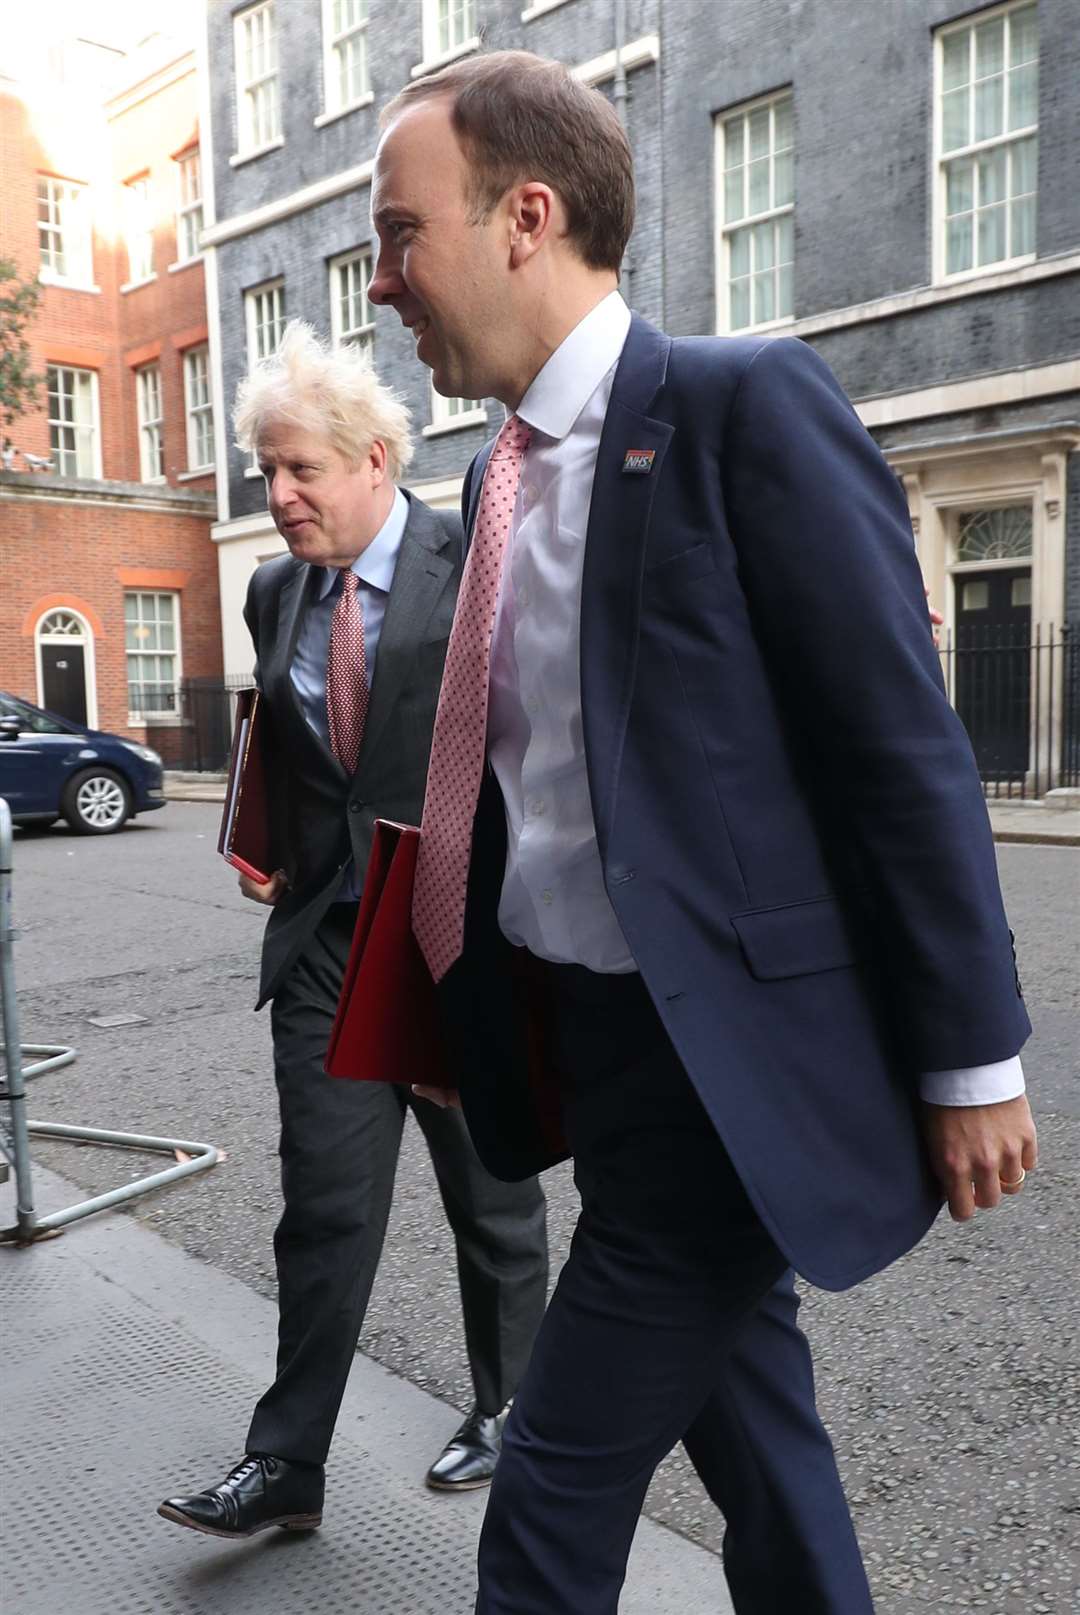 Former prime minister Boris Johnson and ex-health secretary Matt Hancock both came in for criticism from Mark Drakeford during the inquiry hearing (Yui Mok/PA)